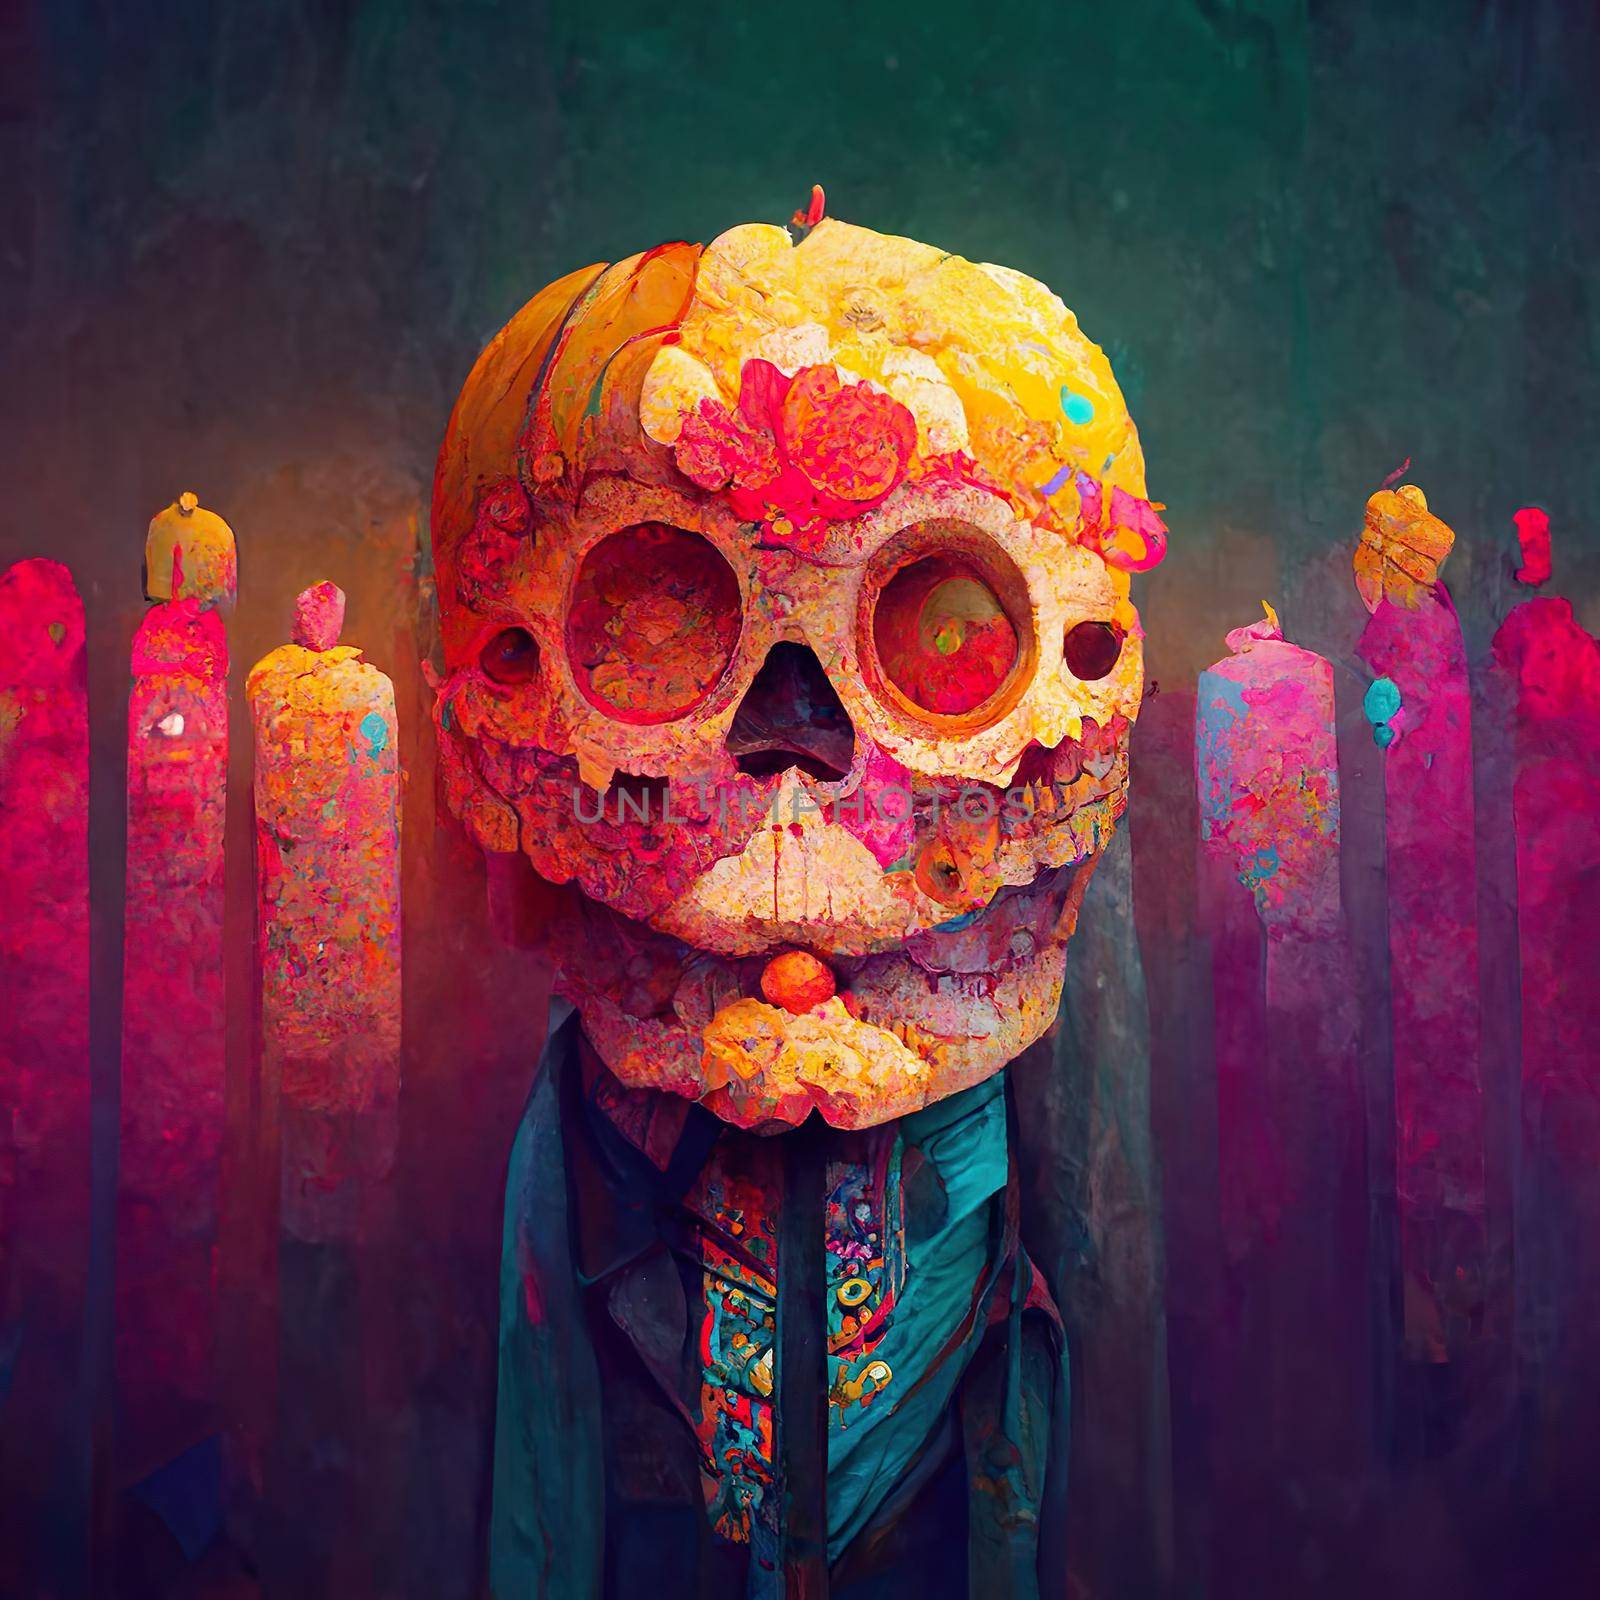 beautiful colorful illustration of the day of the dead, dia de muertos. by JpRamos